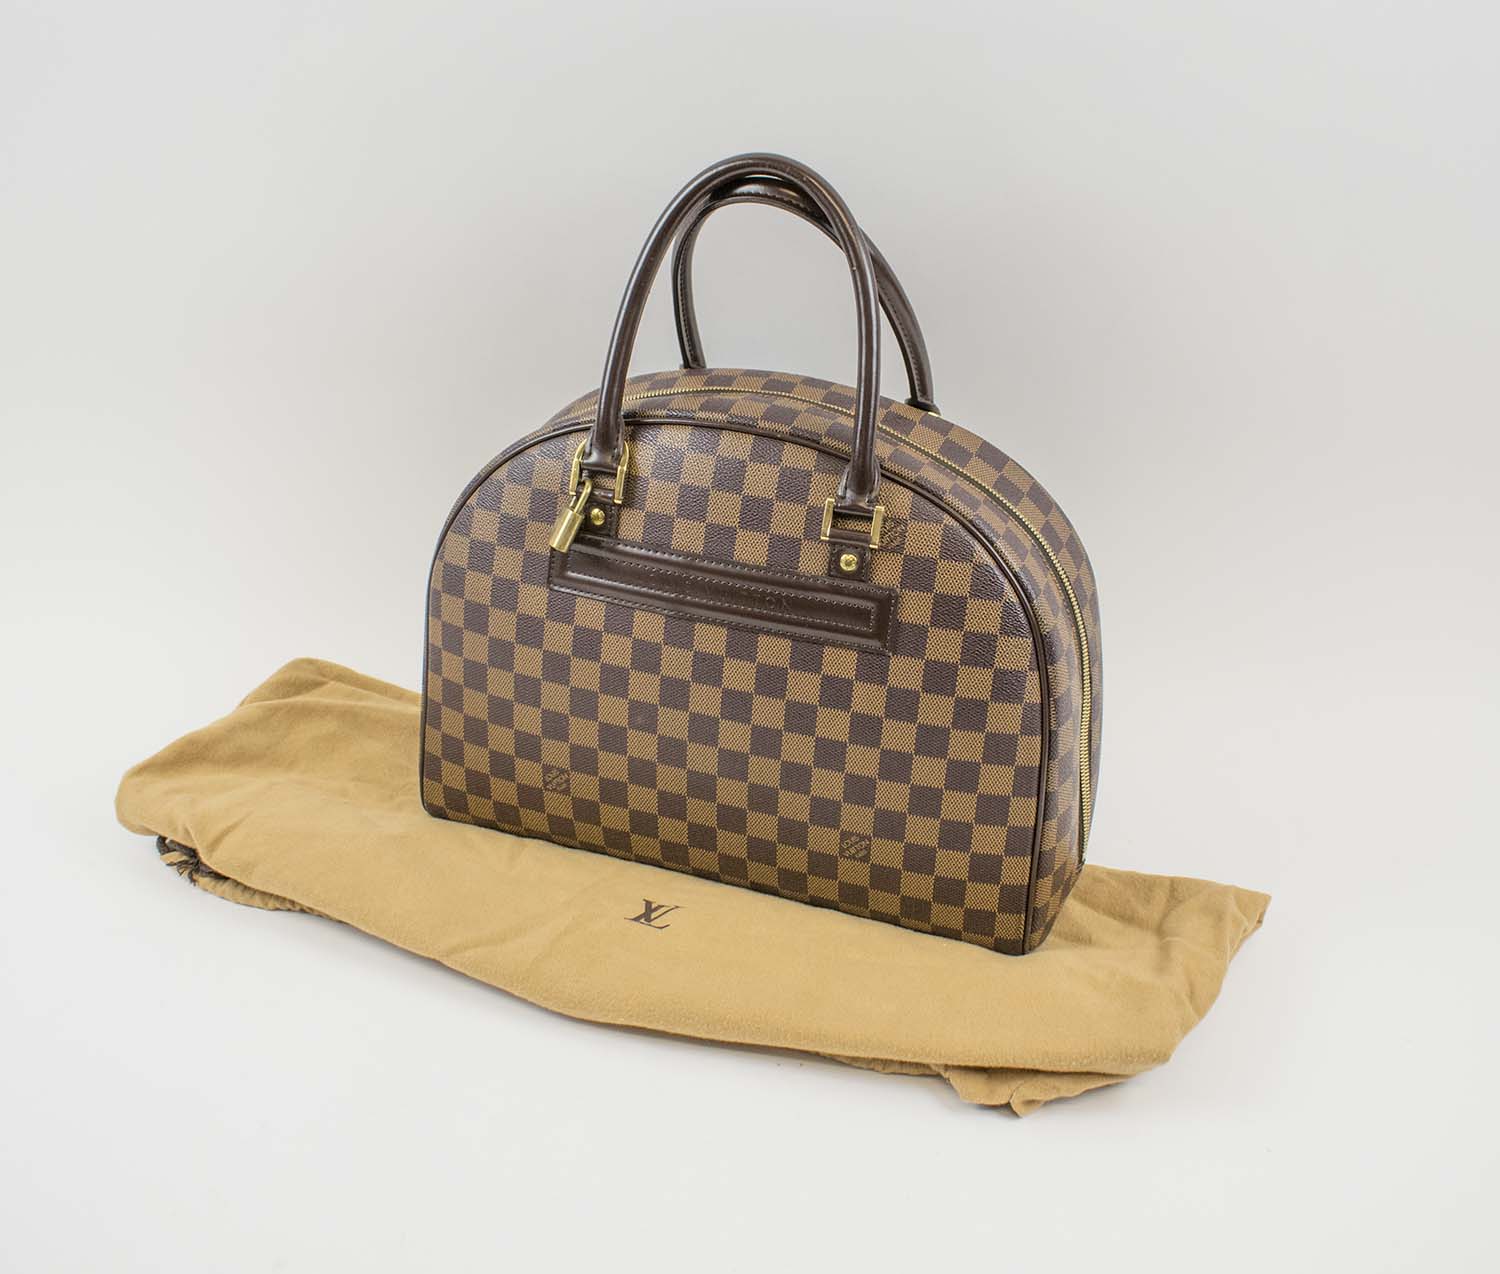 LOUIS VUITTON DAMIER NOLITA BOWLING BAG, with iconic damier pattern, brown  leather handles and trims, gold tone hardware, open front pocket and zip  around closure, with padlock (no keys) and dust bag